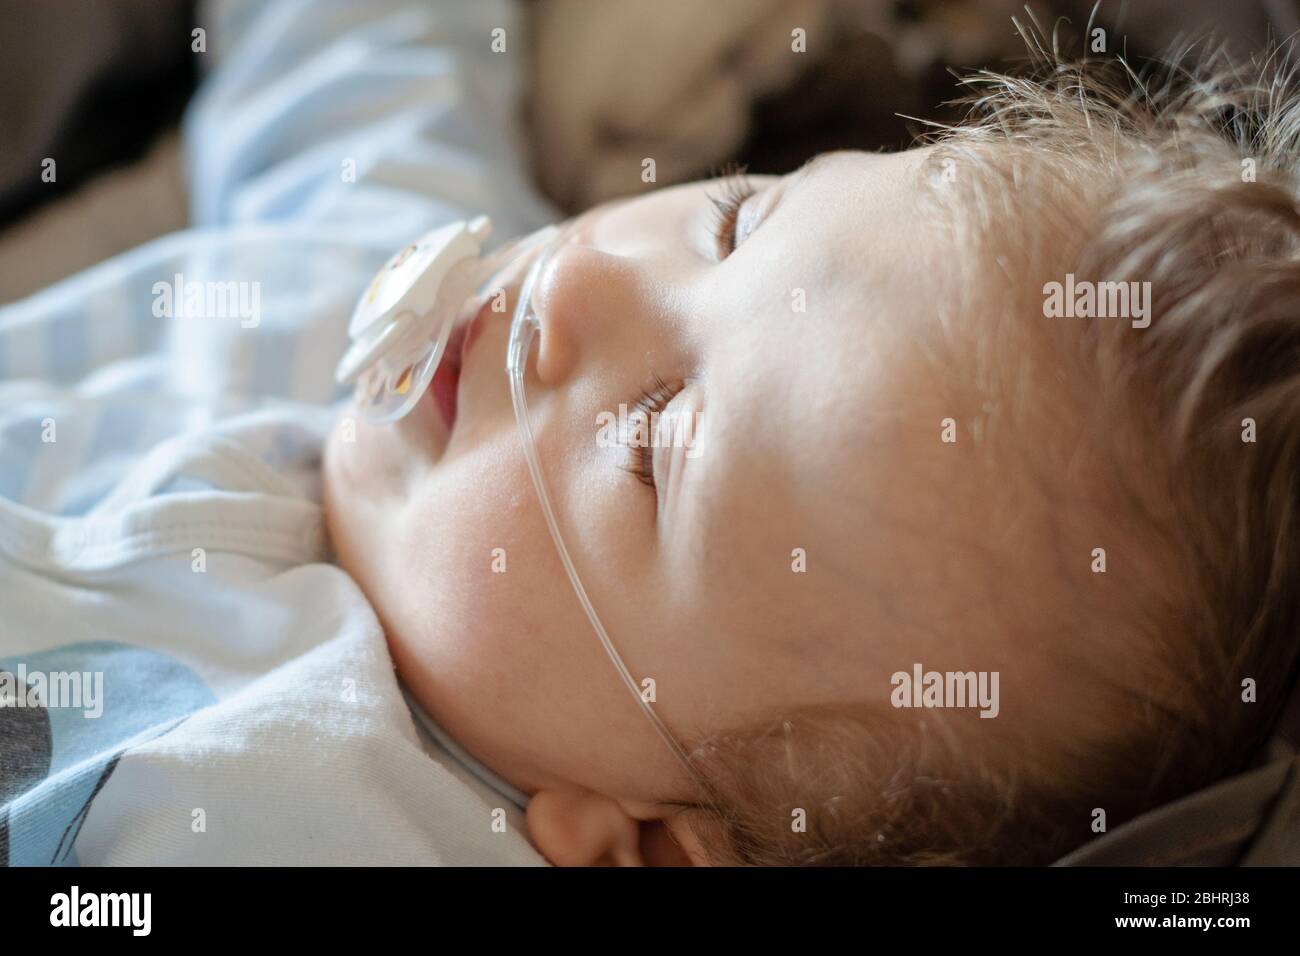 Baby boy with cerebral palsy is getting oxygen via nasal prongs to assure oxygen saturation. Nasal catheter in a child patient in hospital. Respirator Stock Photo